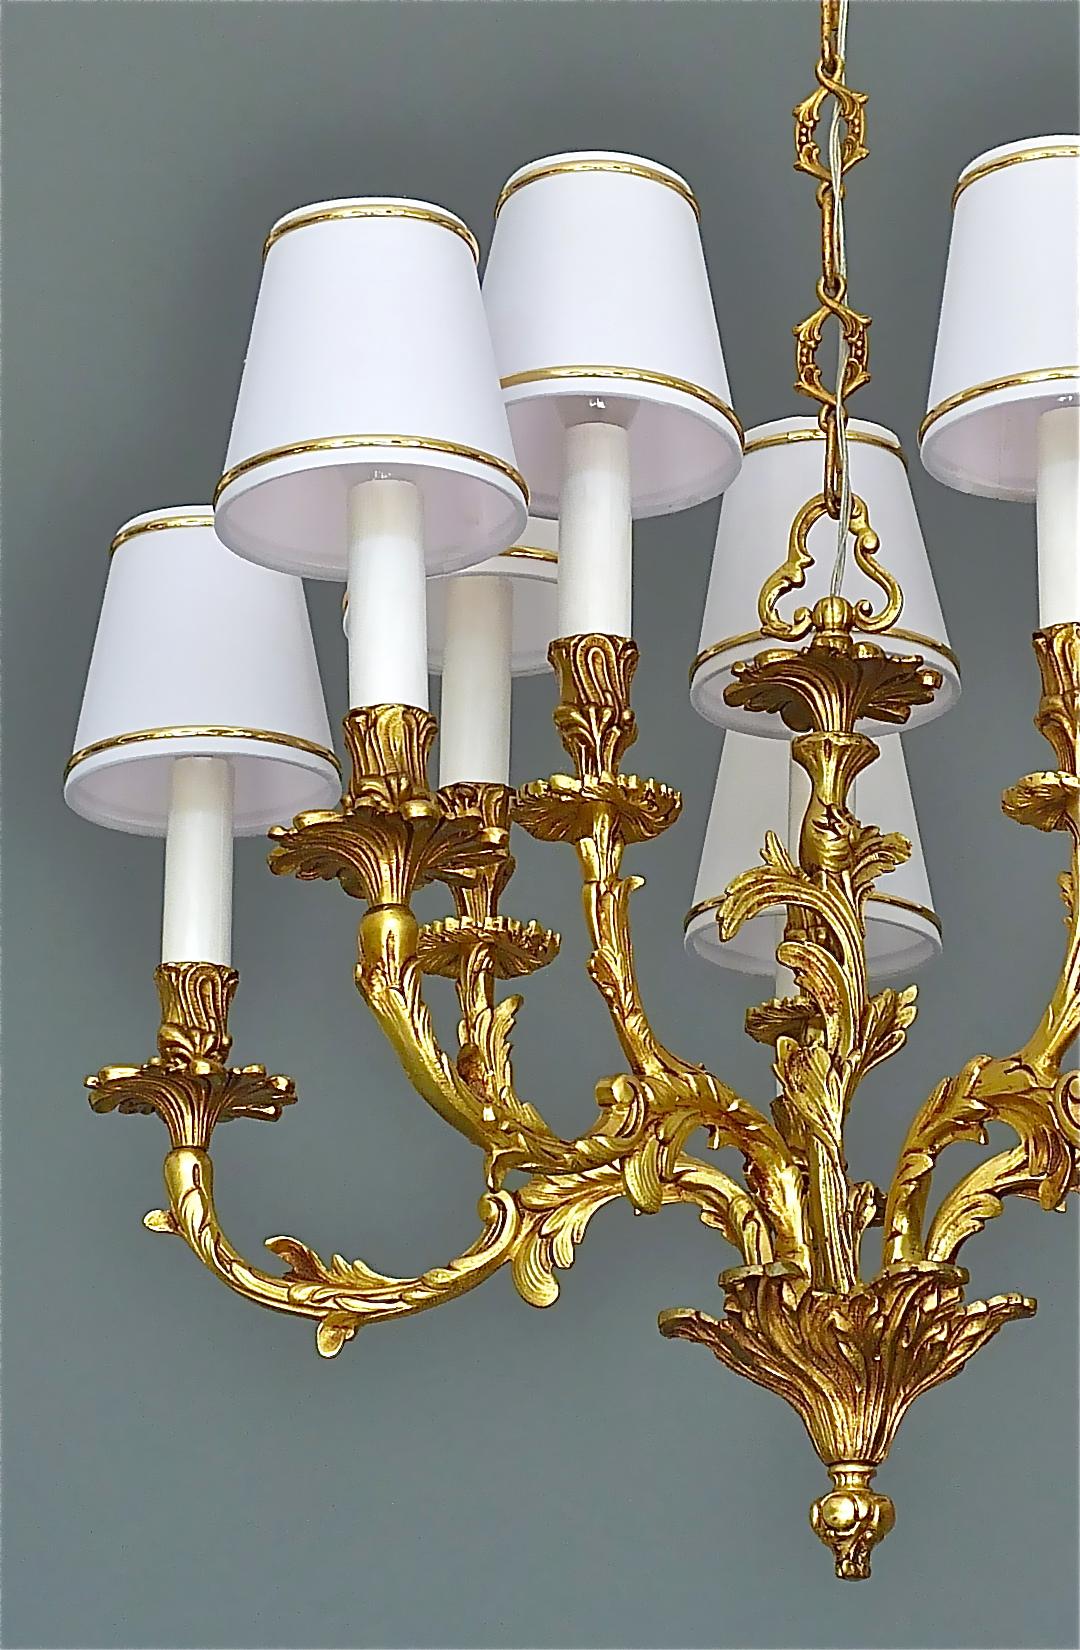 Rococo Revival Large Gilt Bronze 10-Light Chandelier, Floral French Baroque Rococo Baguès Style For Sale